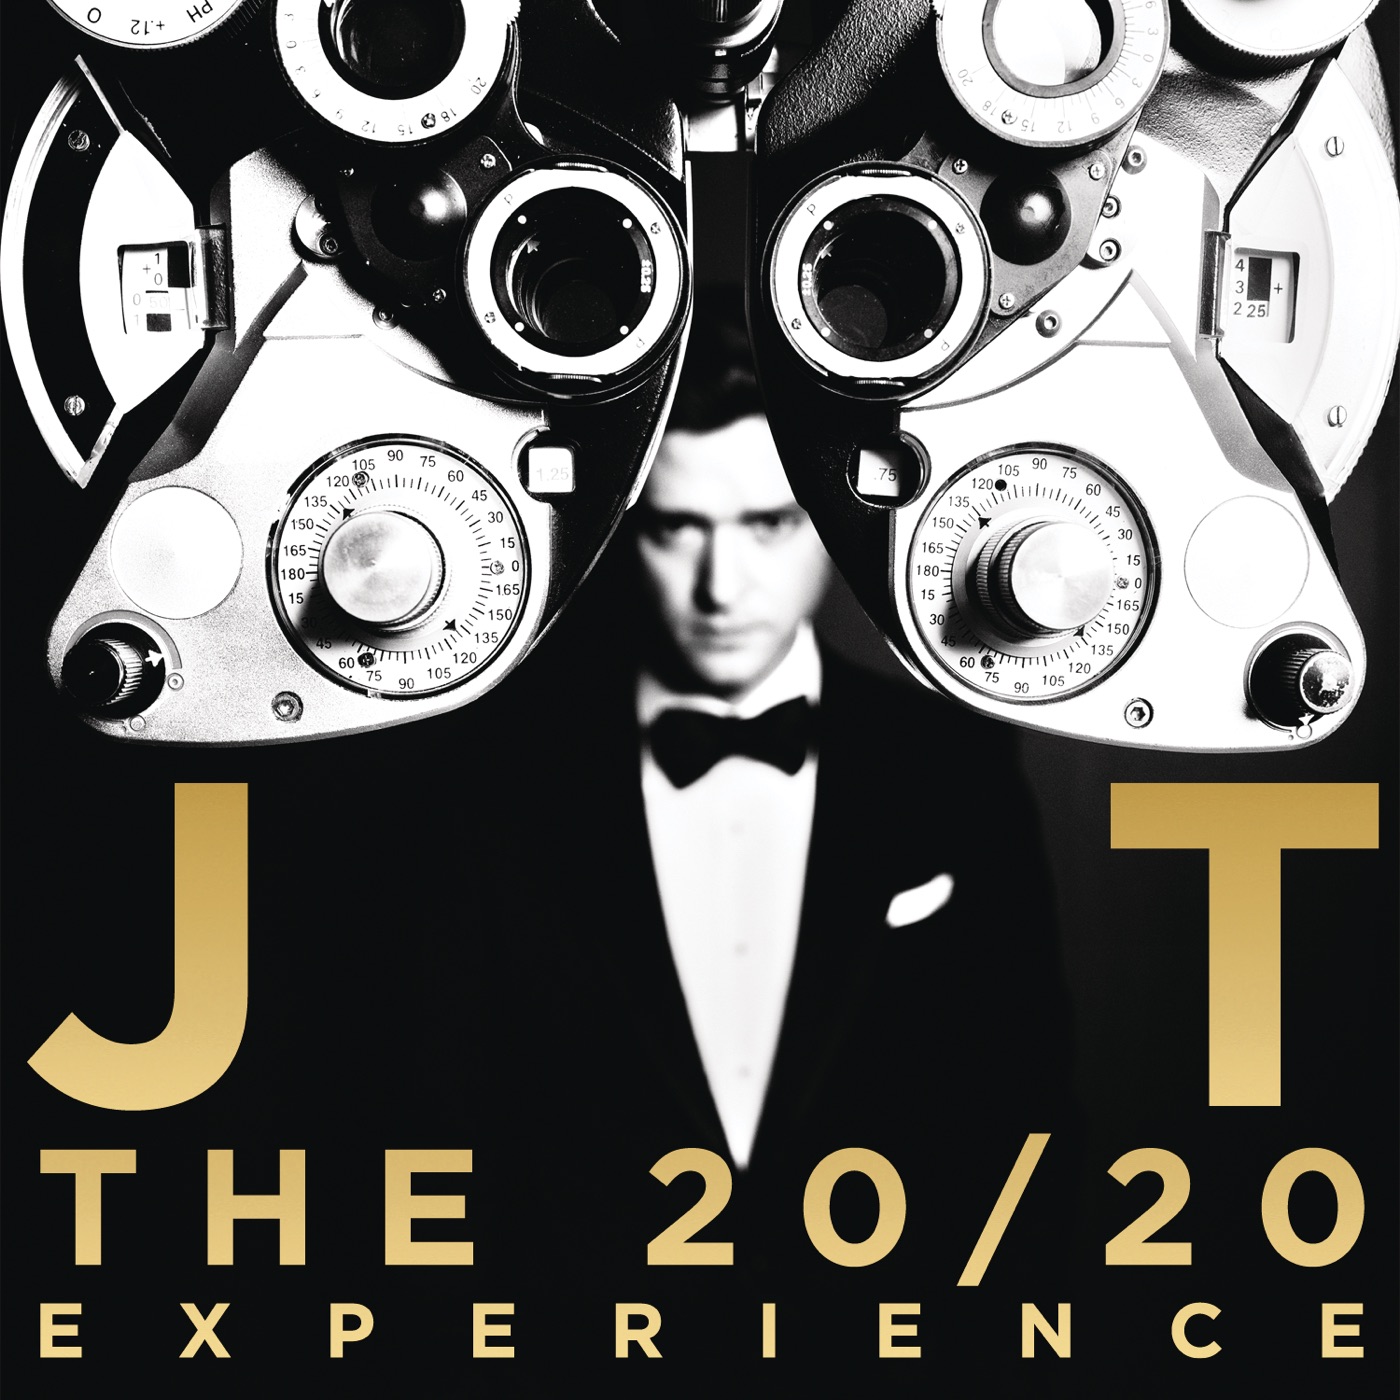 The 20/20 Experience (Deluxe Version) by Justin Timberlake